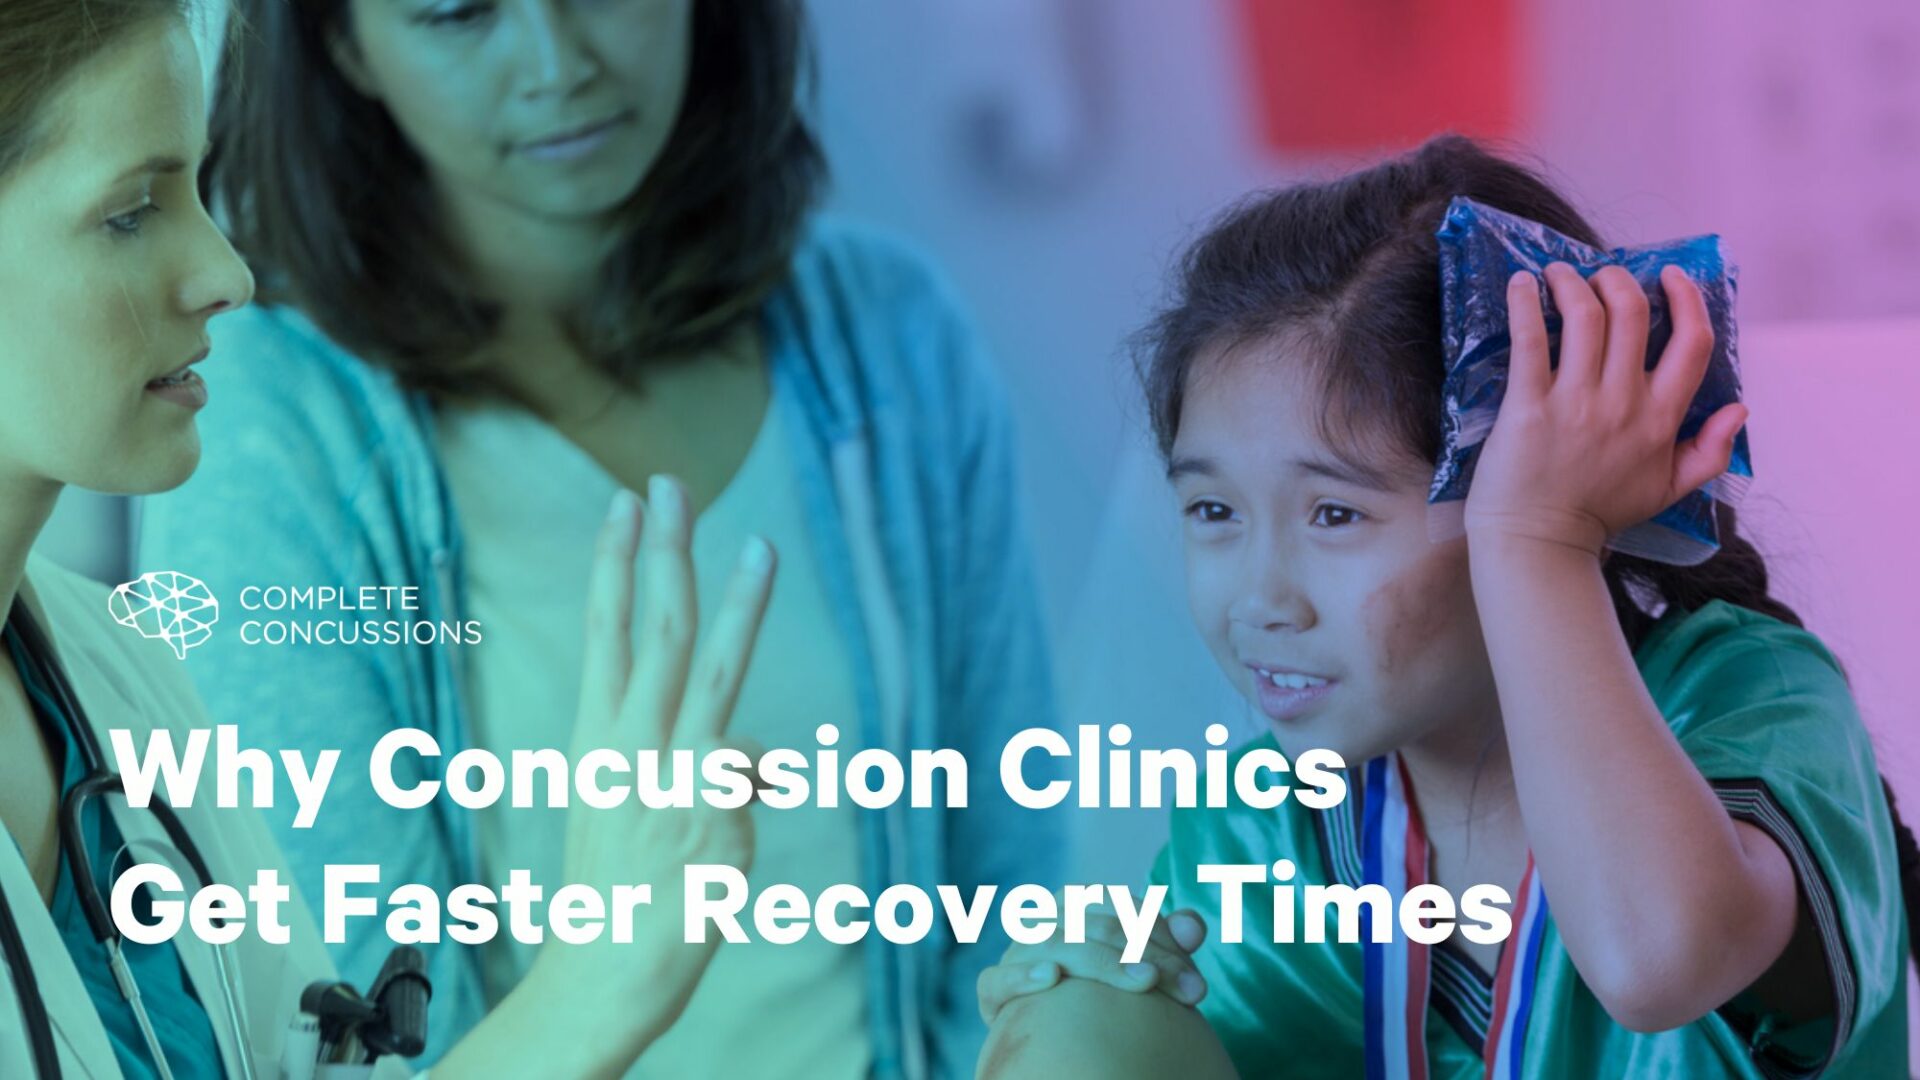 Why Concussion Clinics Get Faster Recovery Times